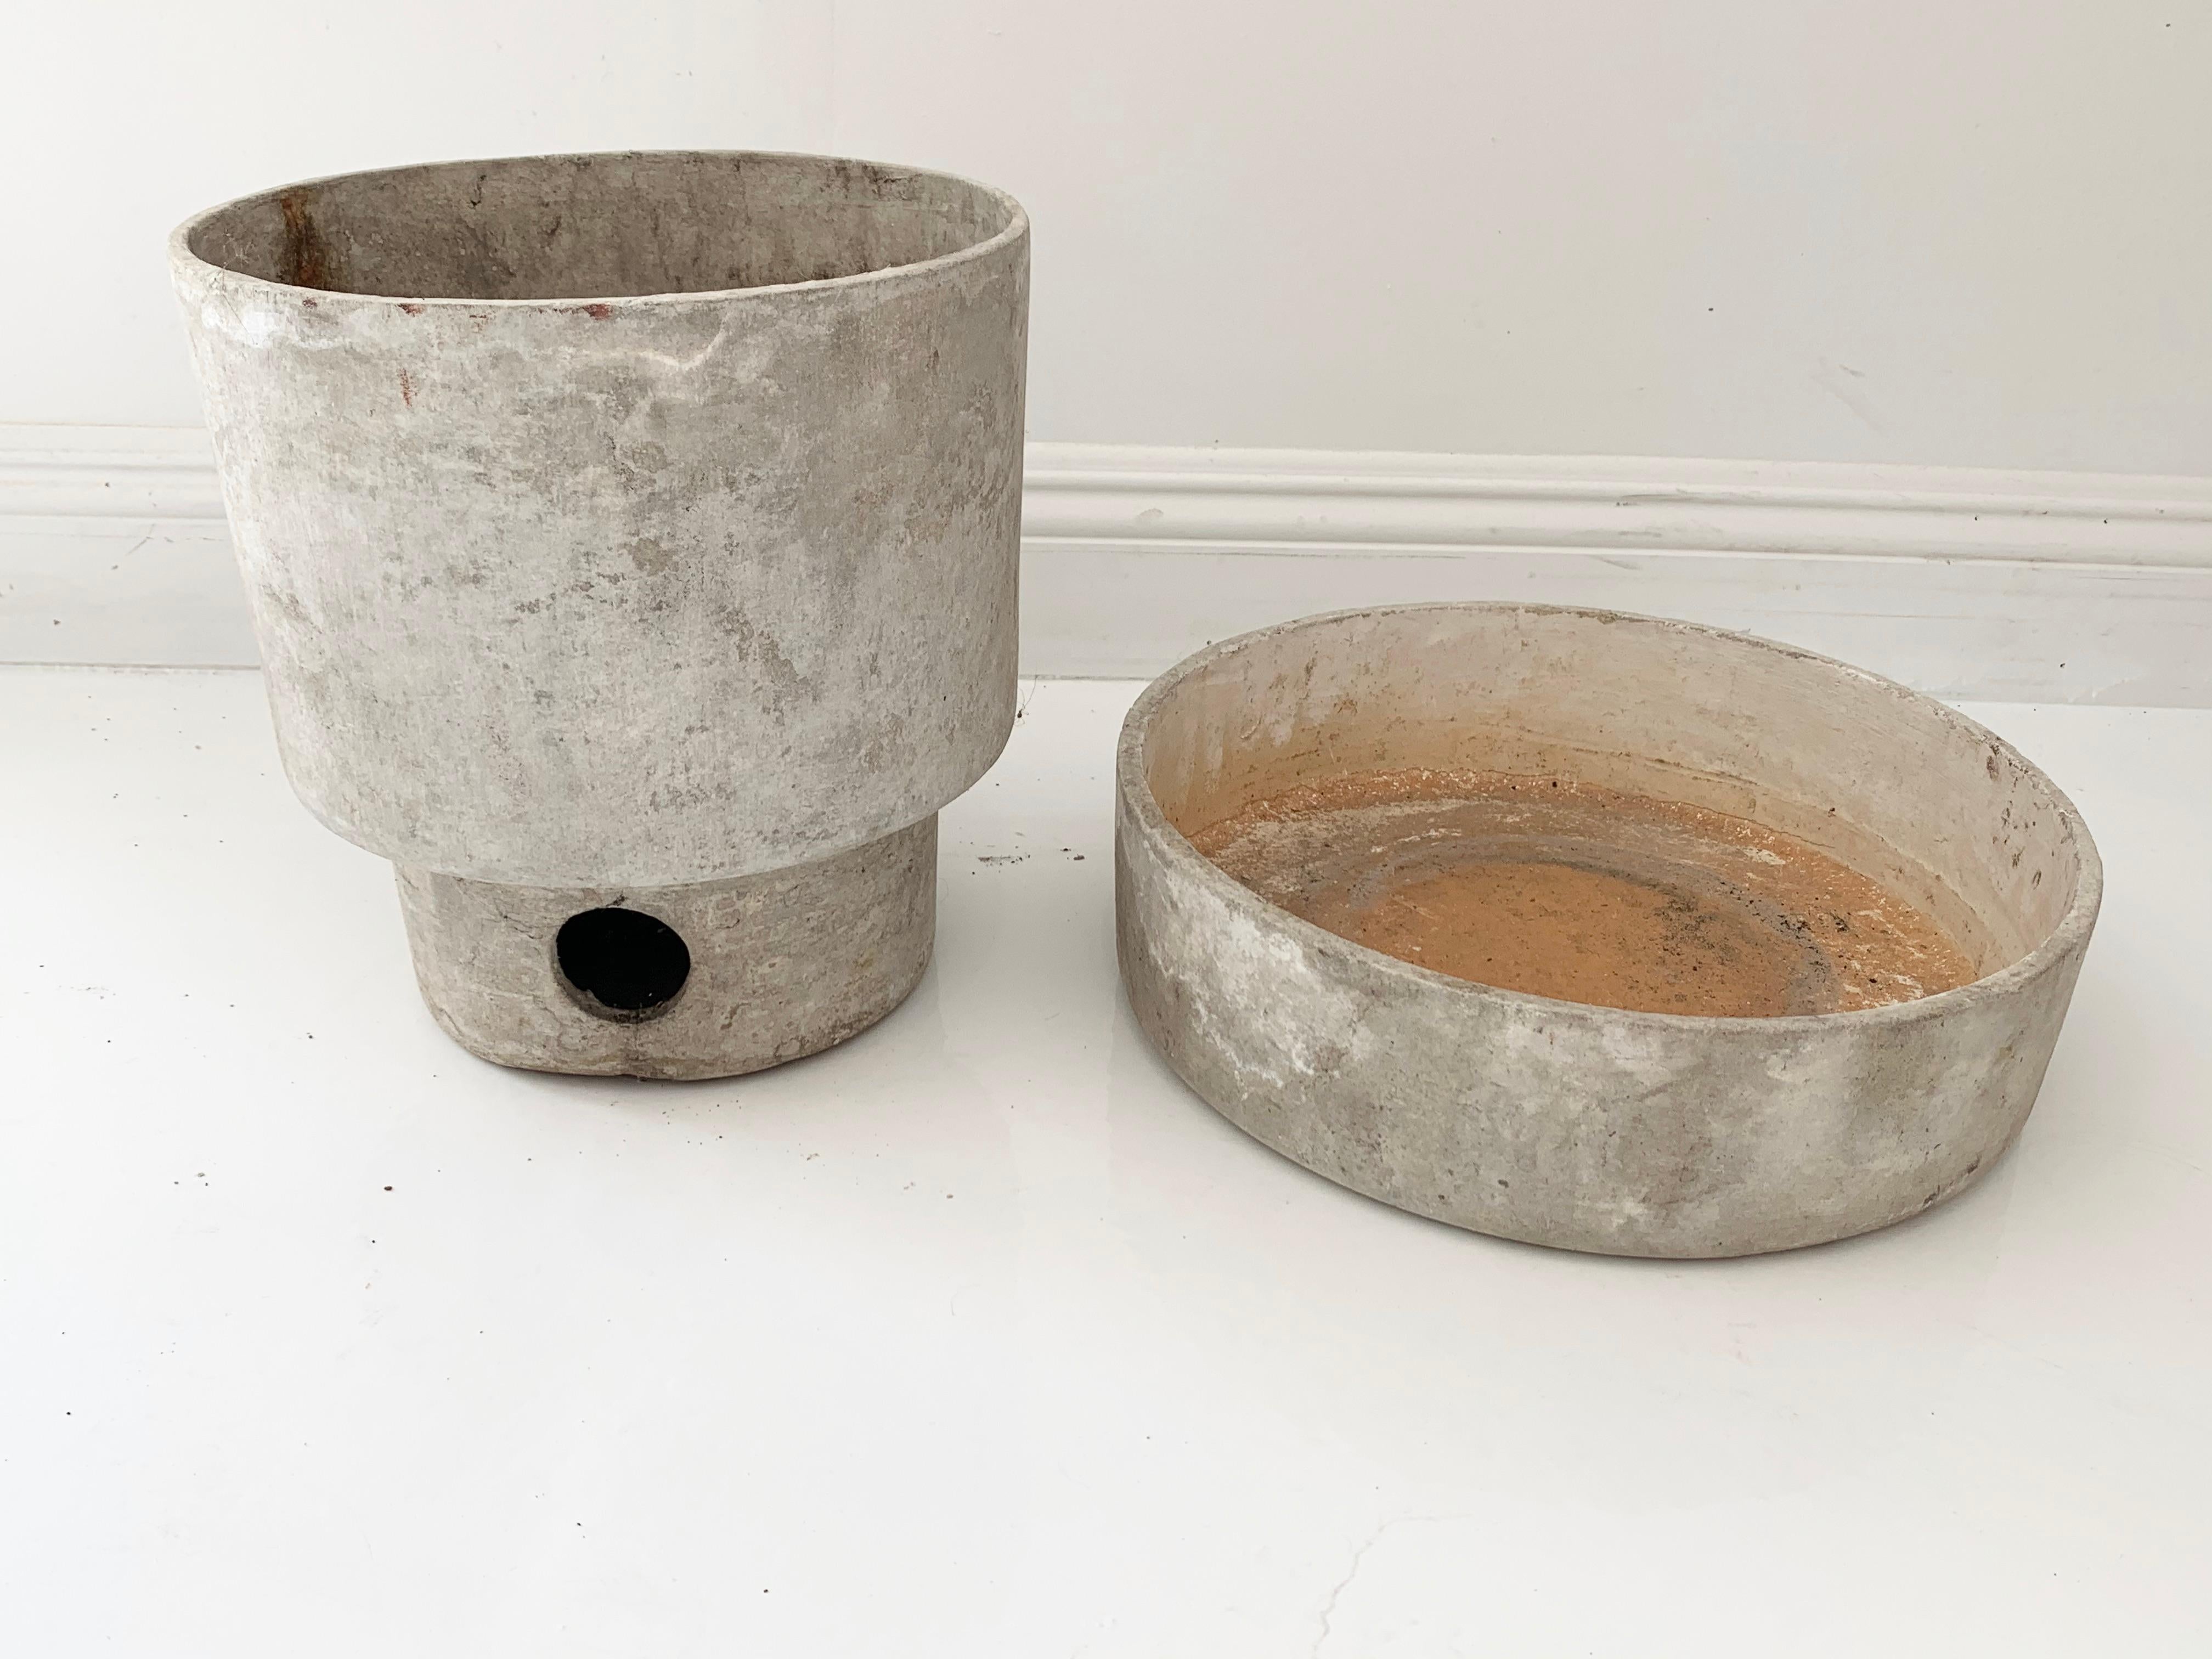 Unique sculptural concrete planter by Willy Guhl with 2 pieces. Base is a round disc that holds the flower pot. The cylindrical flower pot has two circular cutouts on each side of its base. Great looking and super functional planter. Great piece of